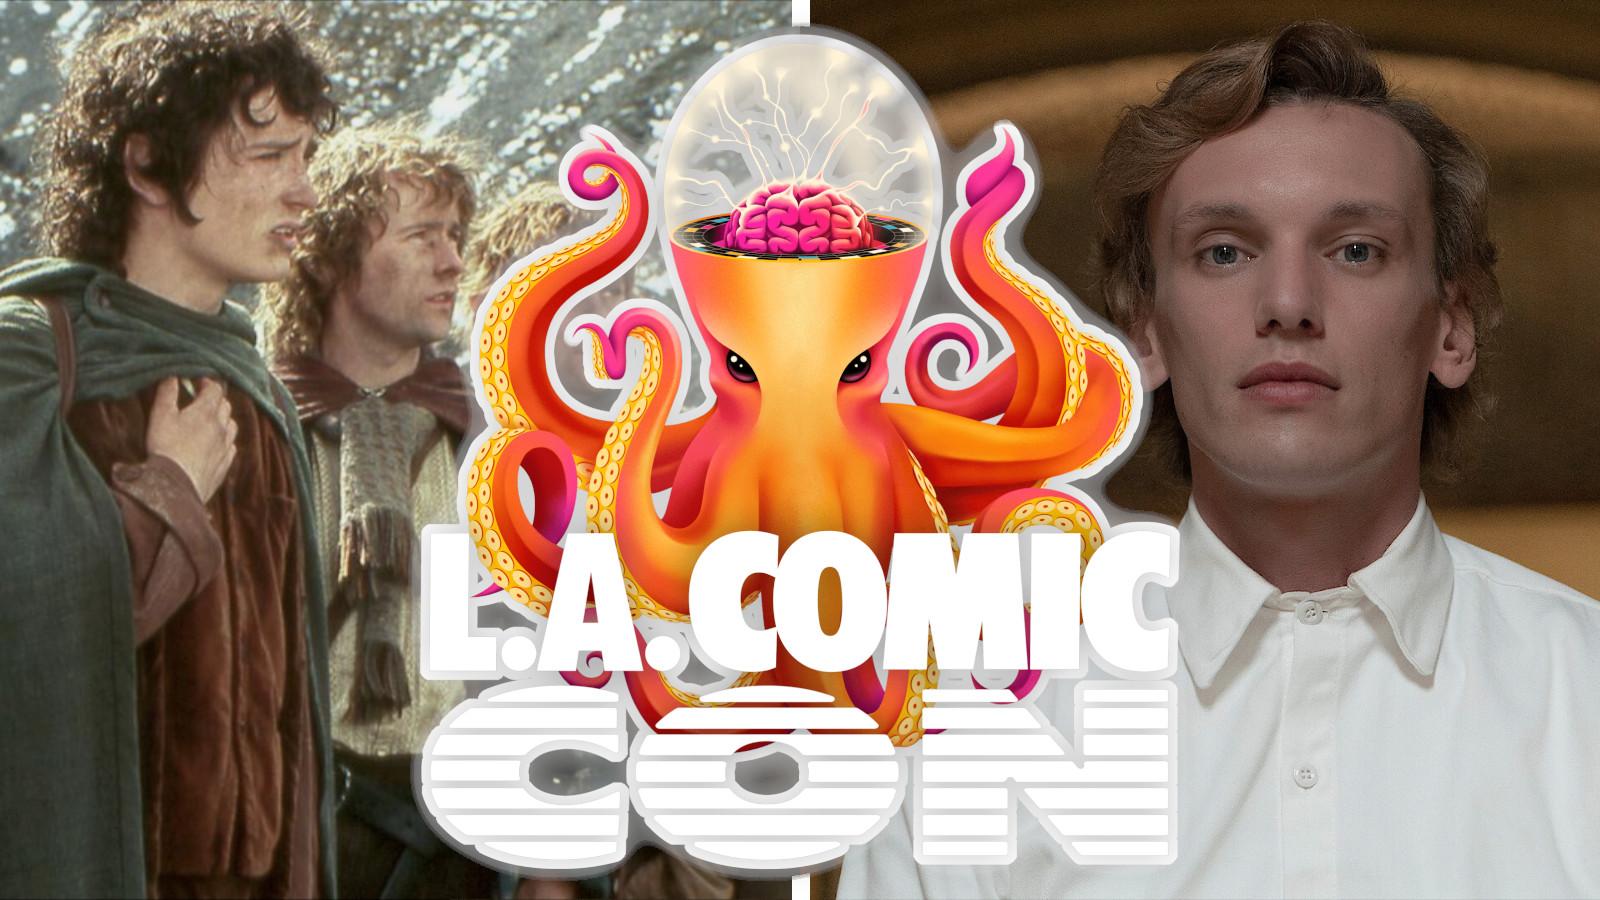 LA Comic Con header with images from The Lord of the Rings and Stranger Things